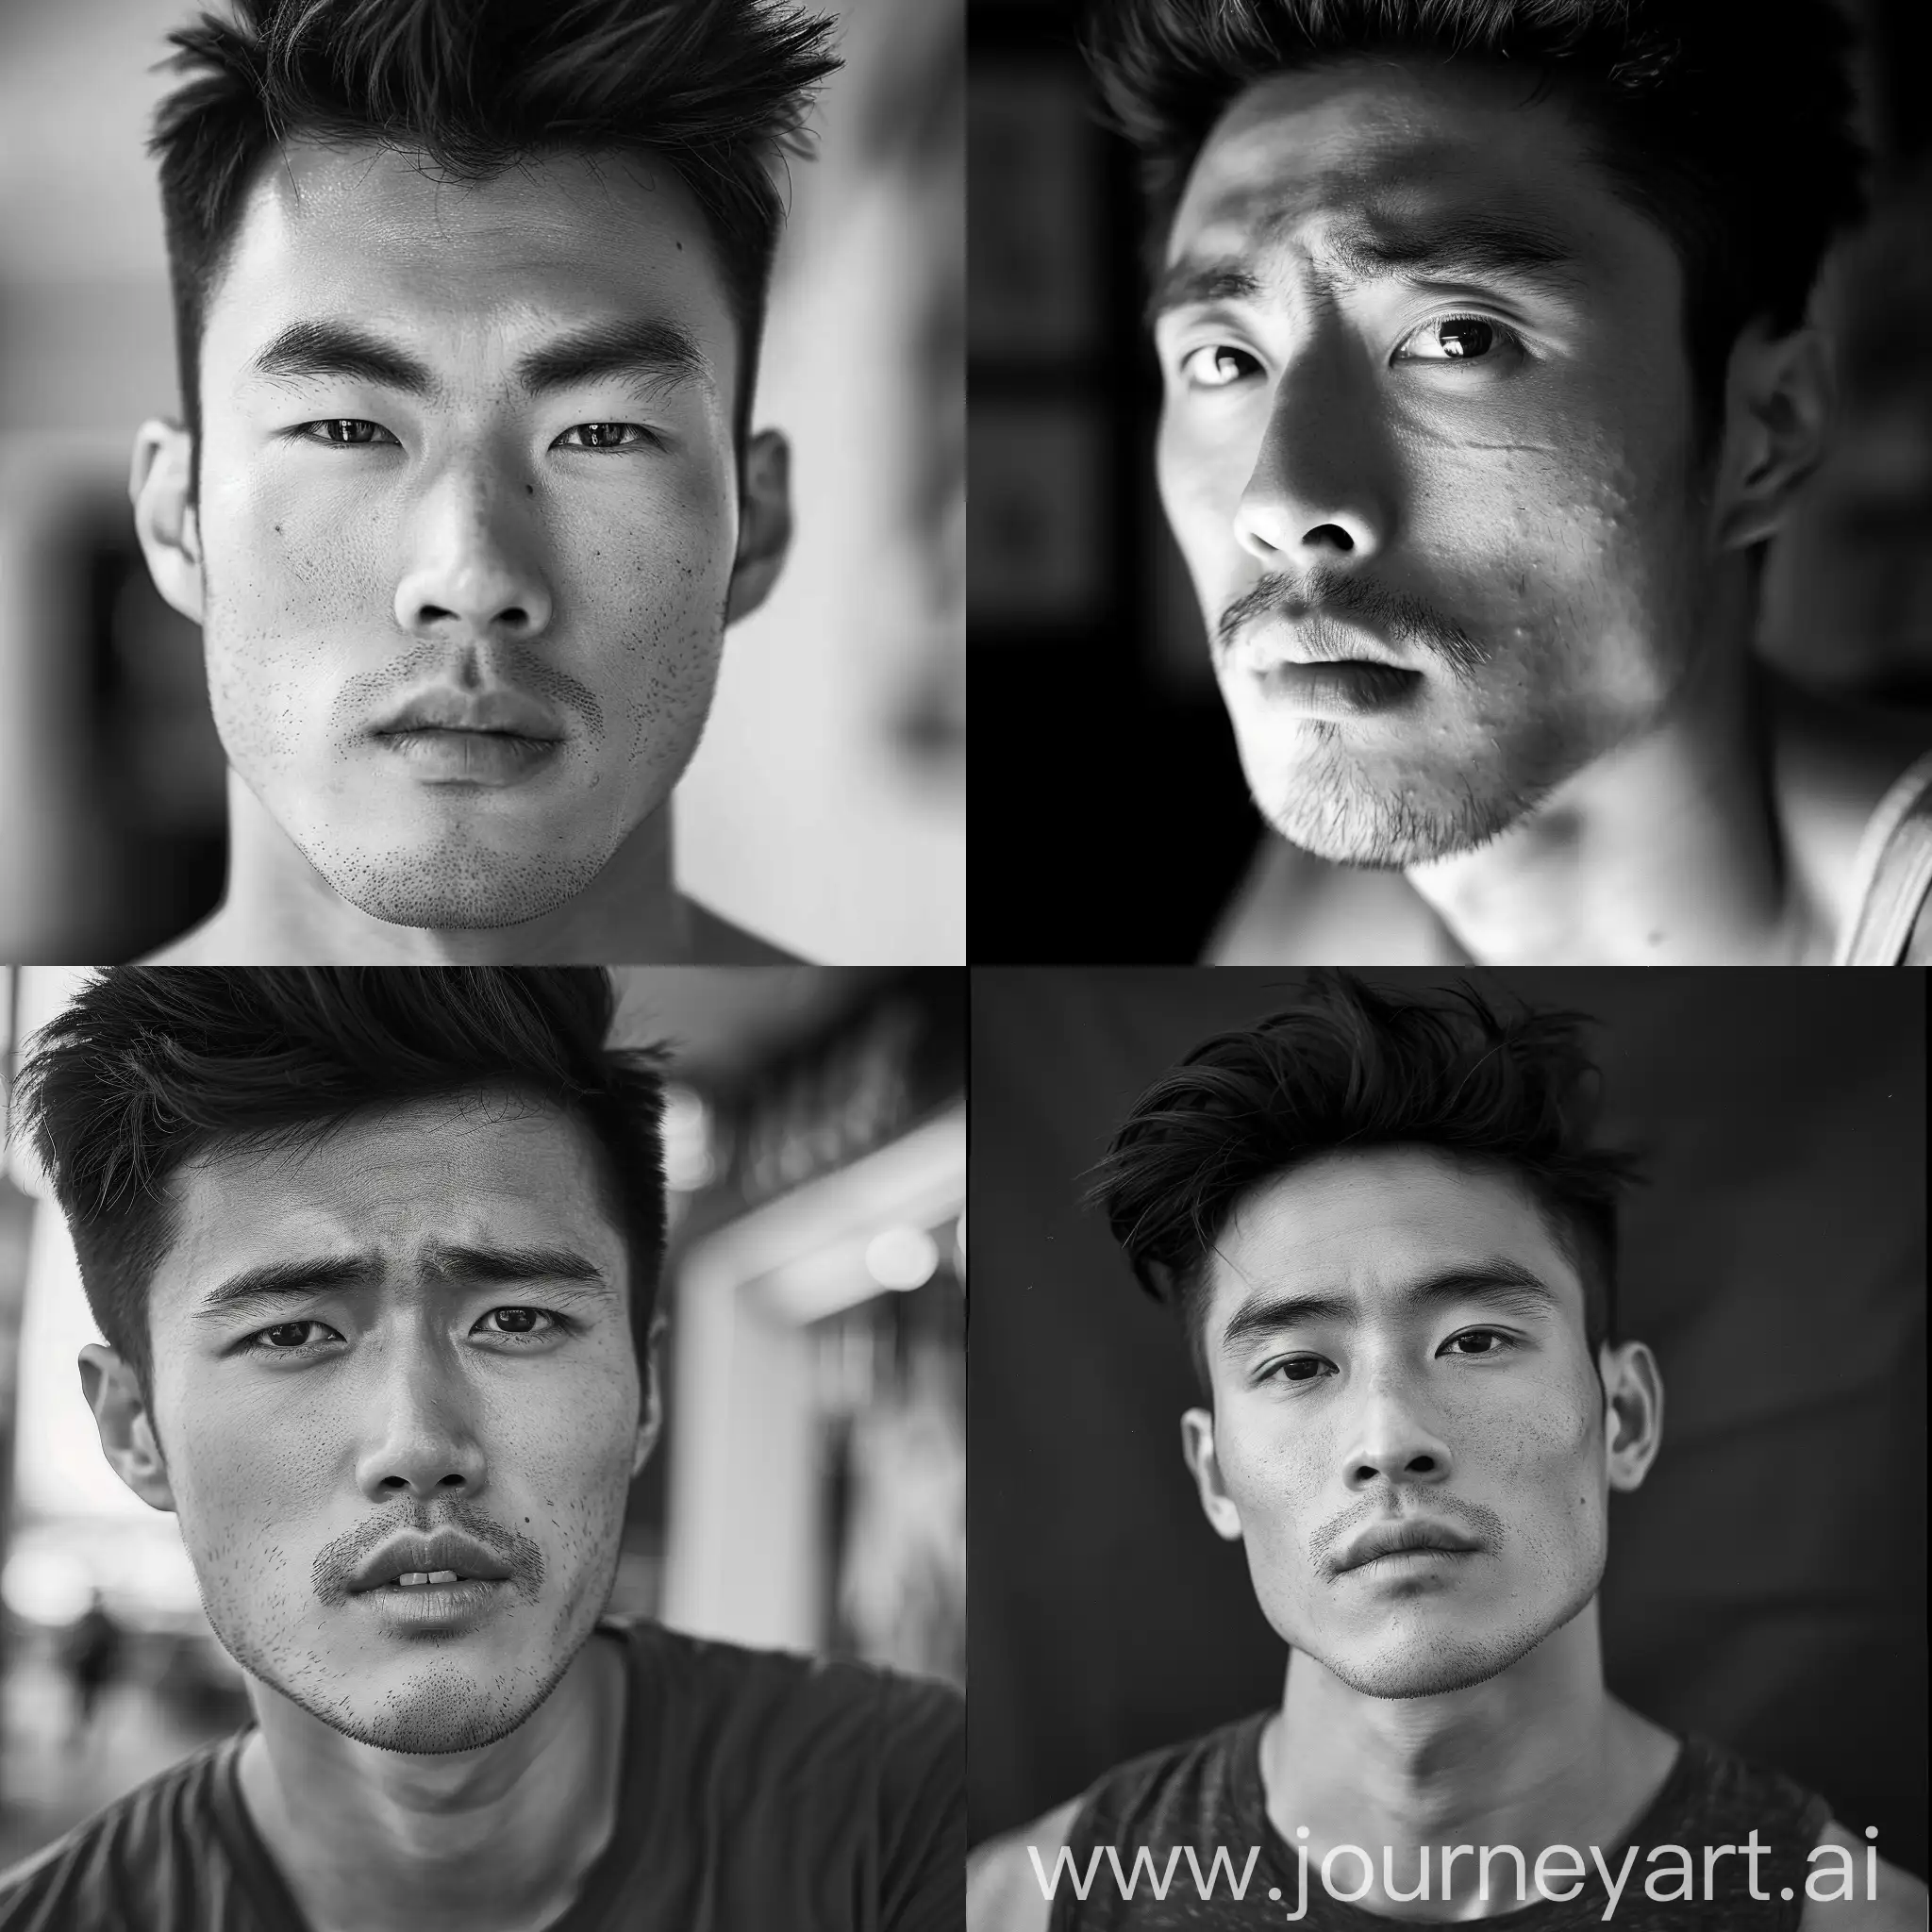 A man look Asian, hansome lookunder 33Image black and white 1:1